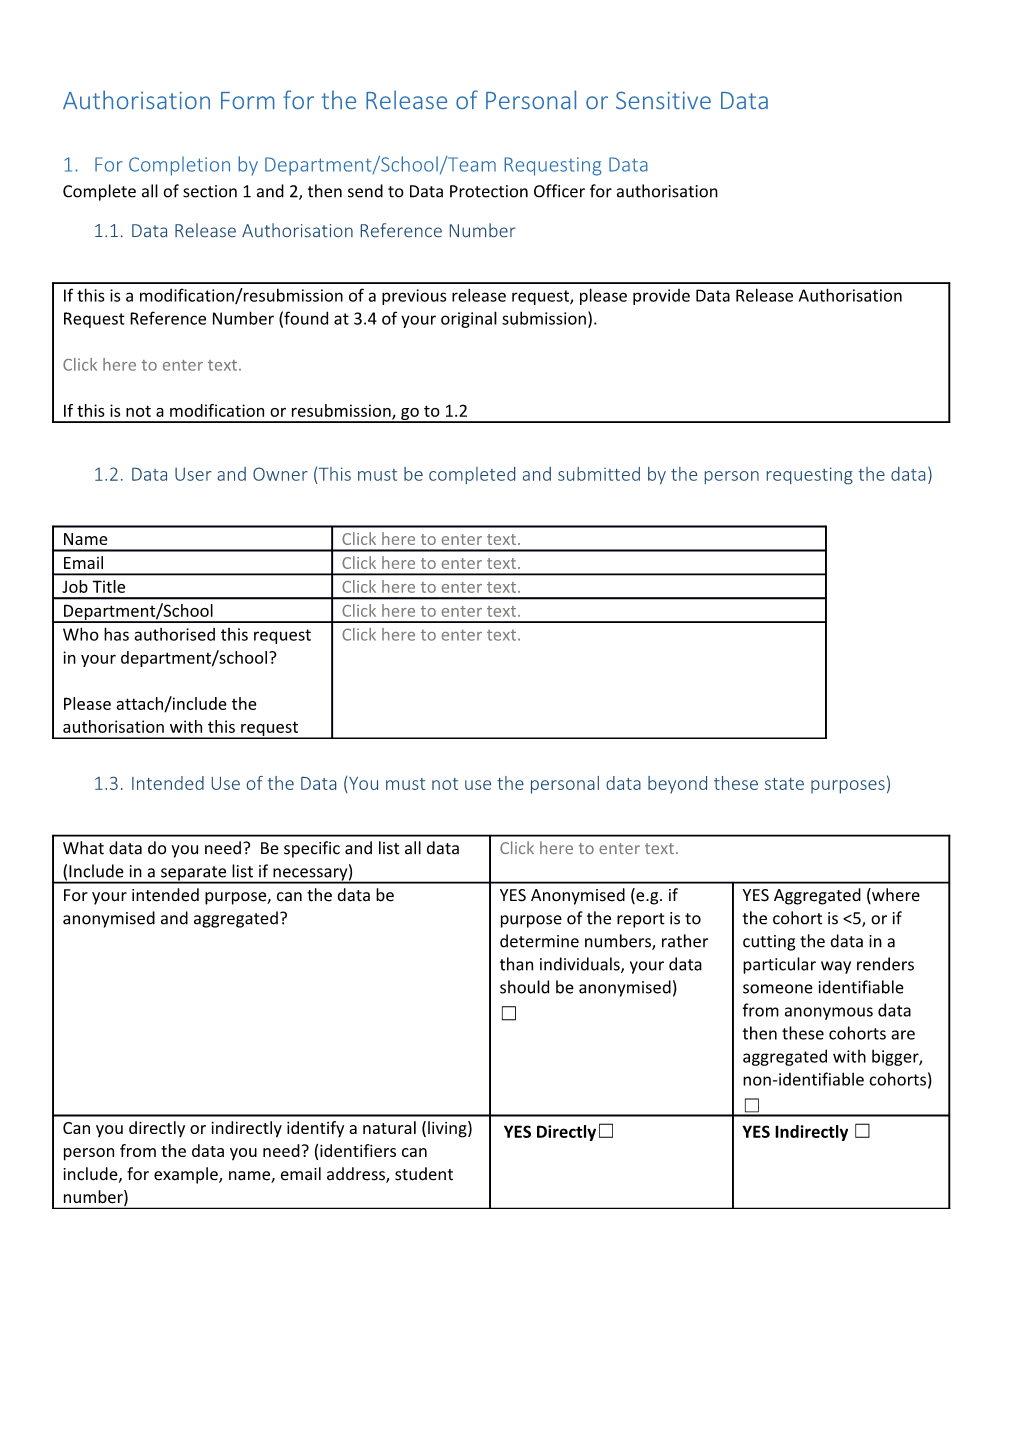 Authorisation Form for the Release of Personal Or Sensitive Data